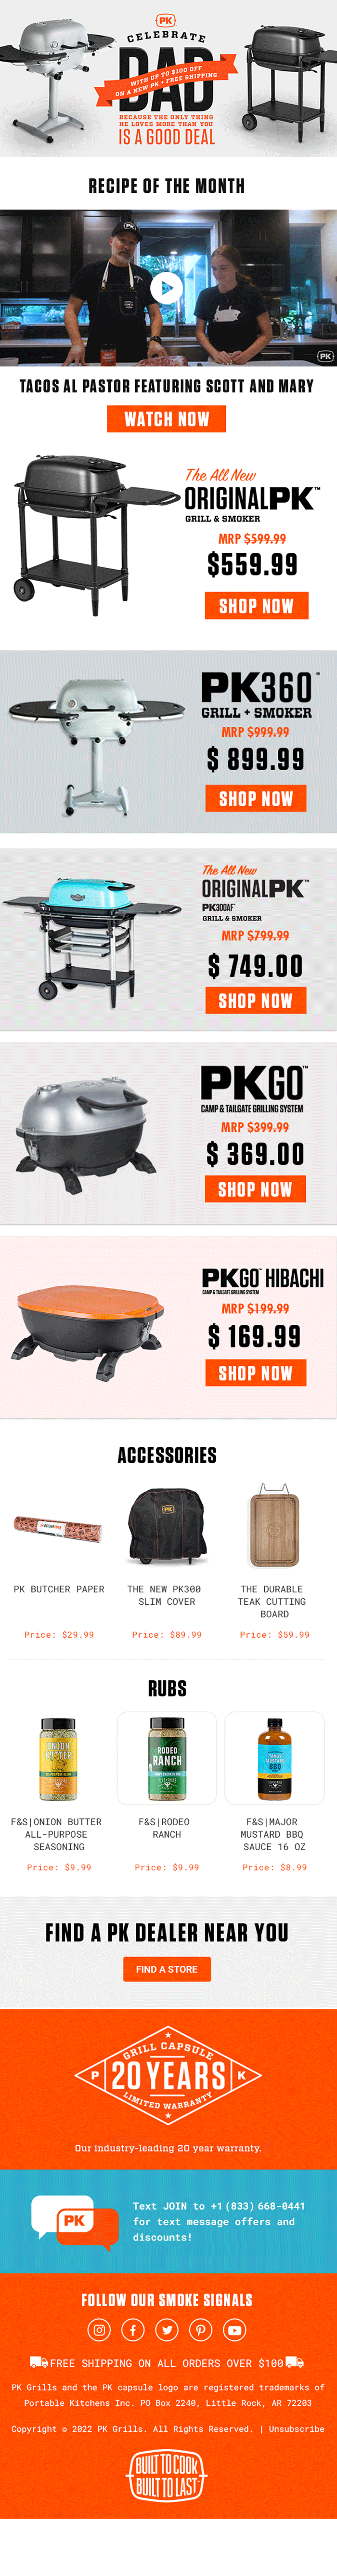 PK Grills Email Design Examples